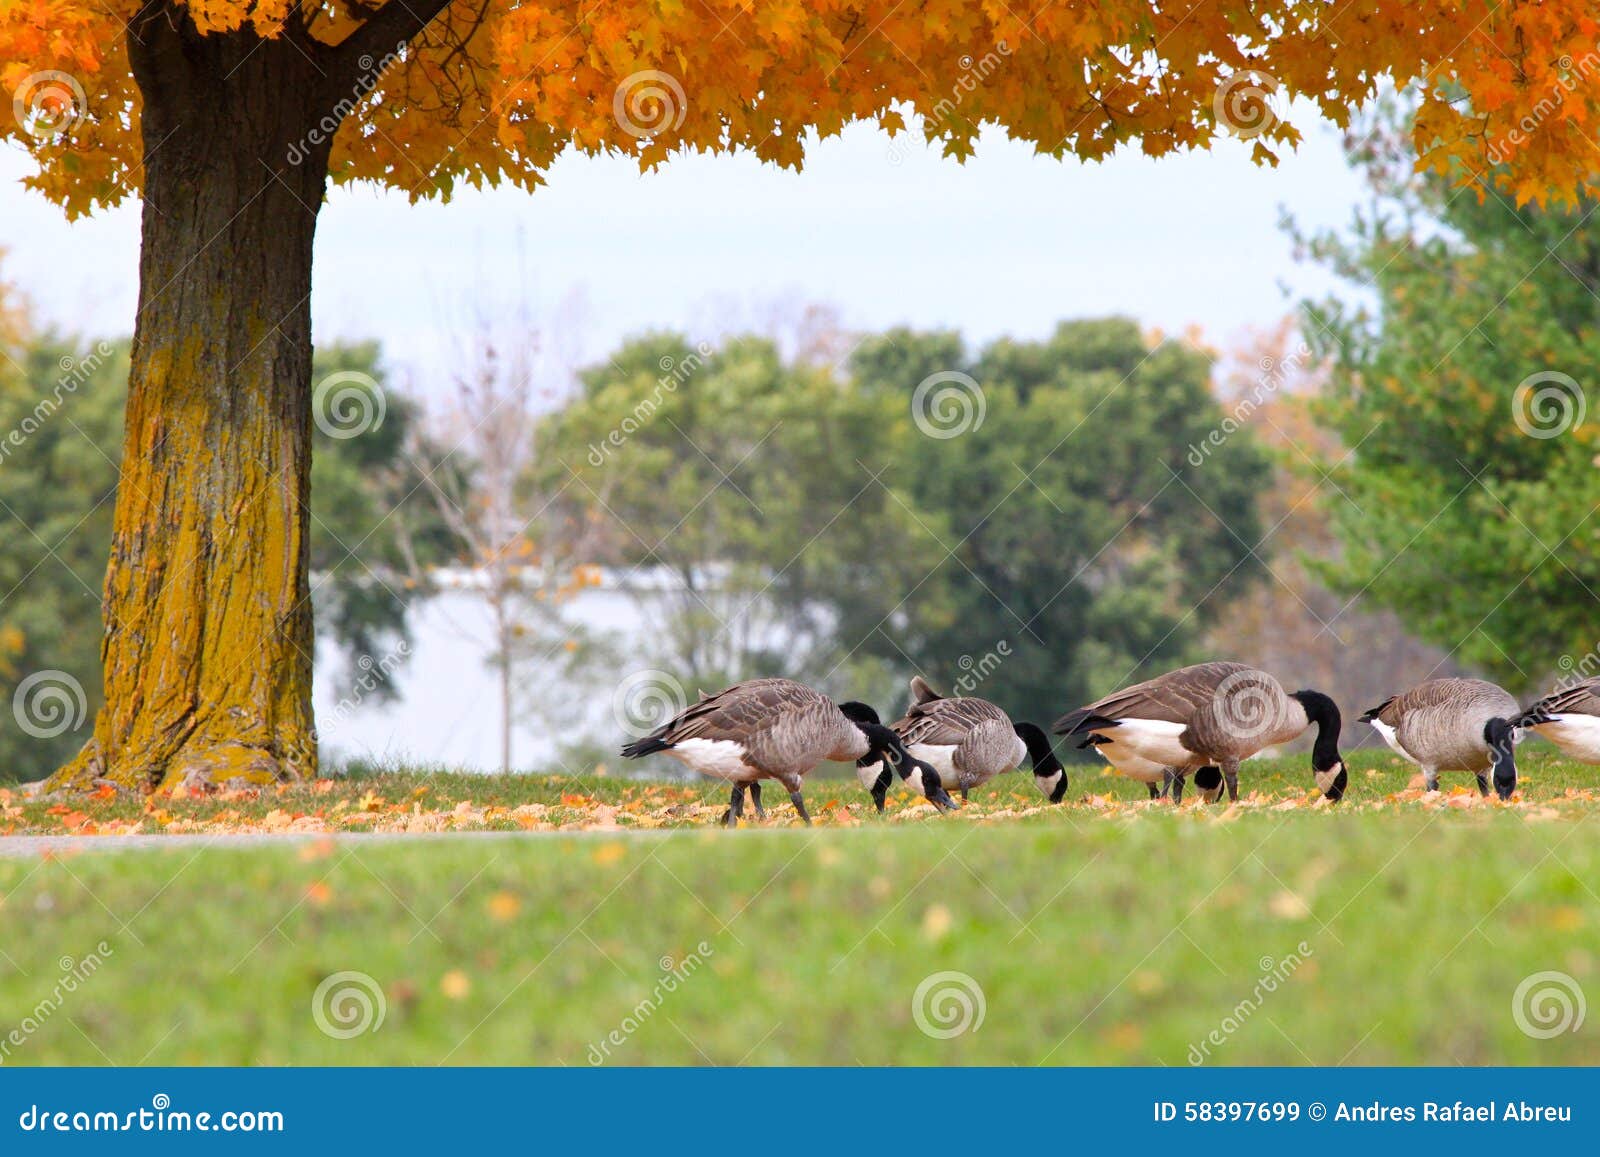 geese in the fall